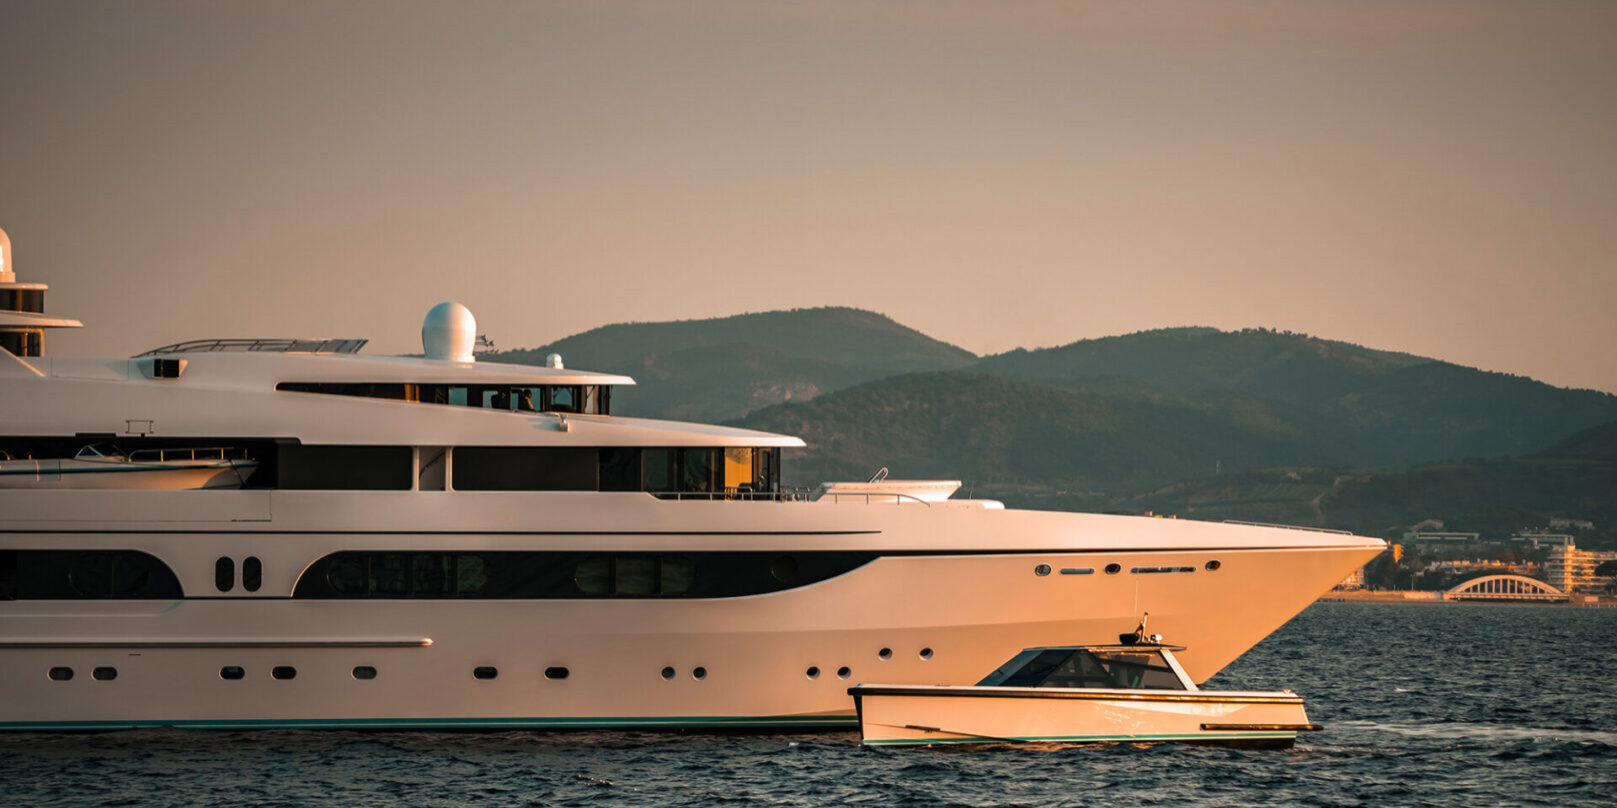 Mood detail shot of Superyacht bow with it's tender chase boat motoring past on a sunset warm light in the bay of Saint-Tropez, South of France